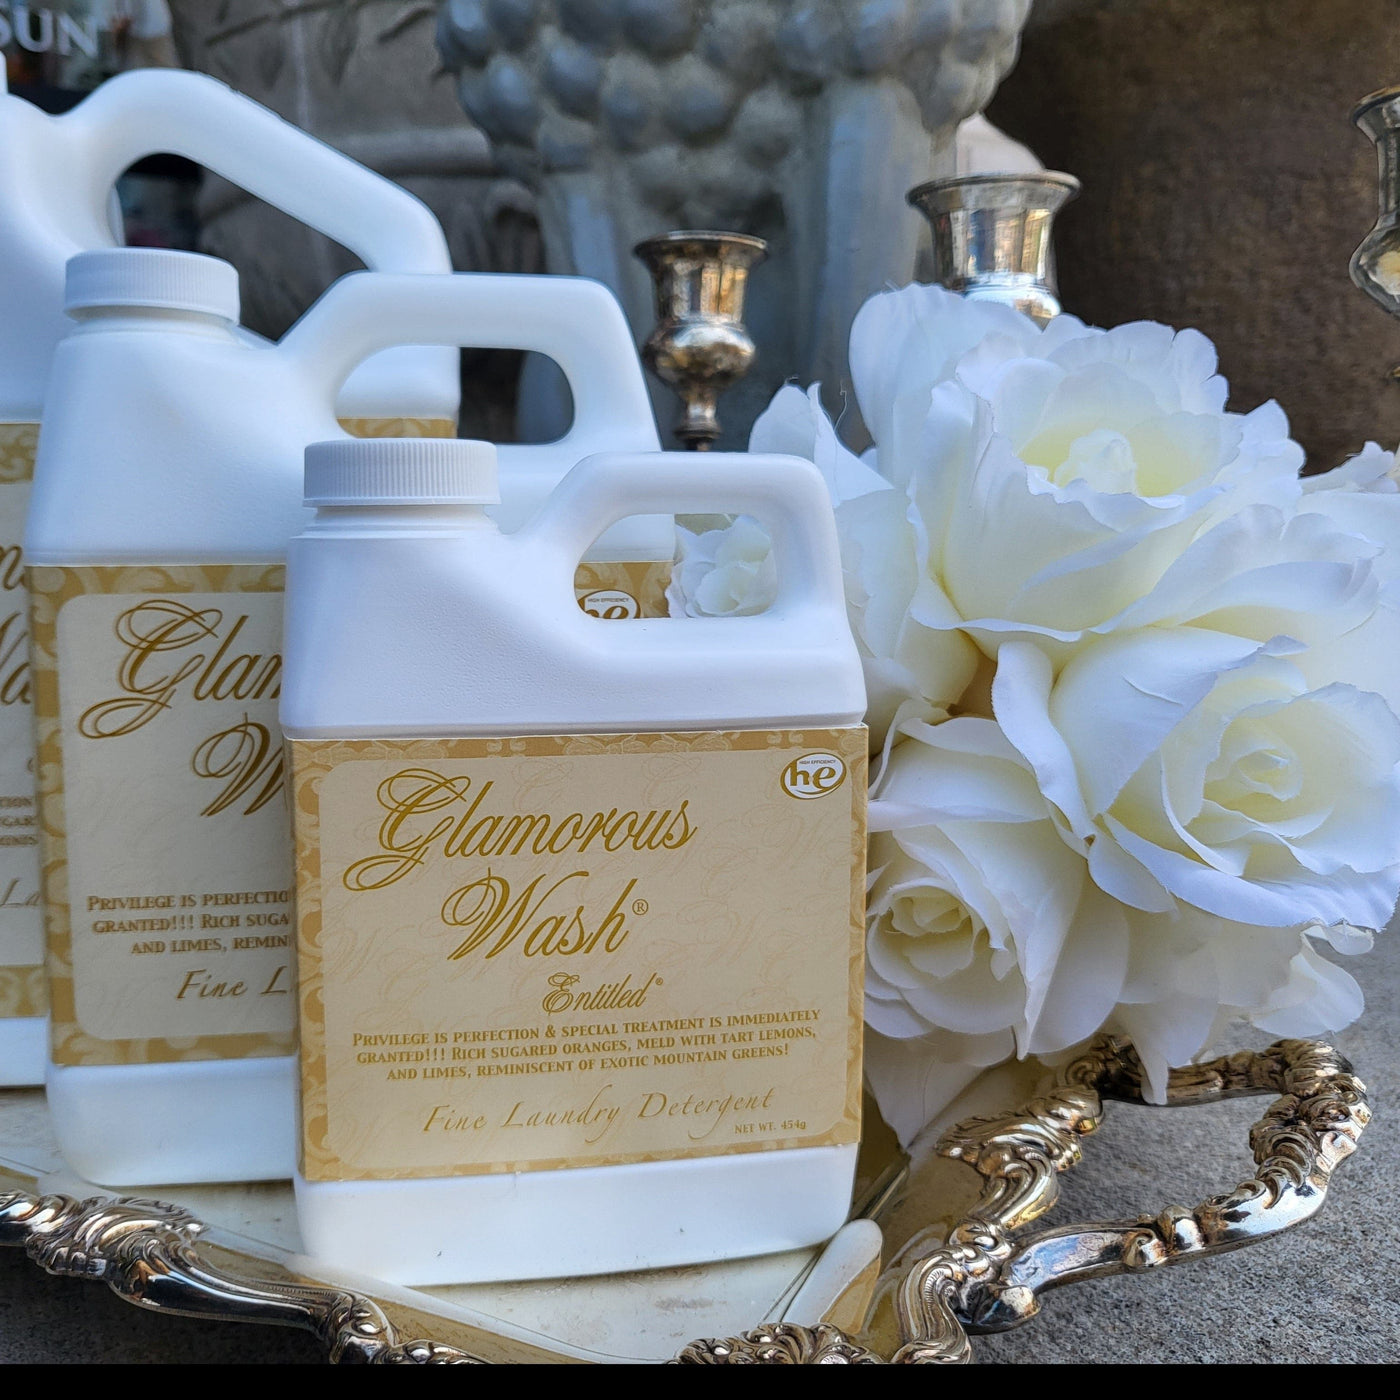 Glamorous Wash in Entitled 907g / 32oz-Delicate Wash-Tyler Candle Company-Anna Bella Fine Lingerie, Reveal Your Most Gorgeous Self!